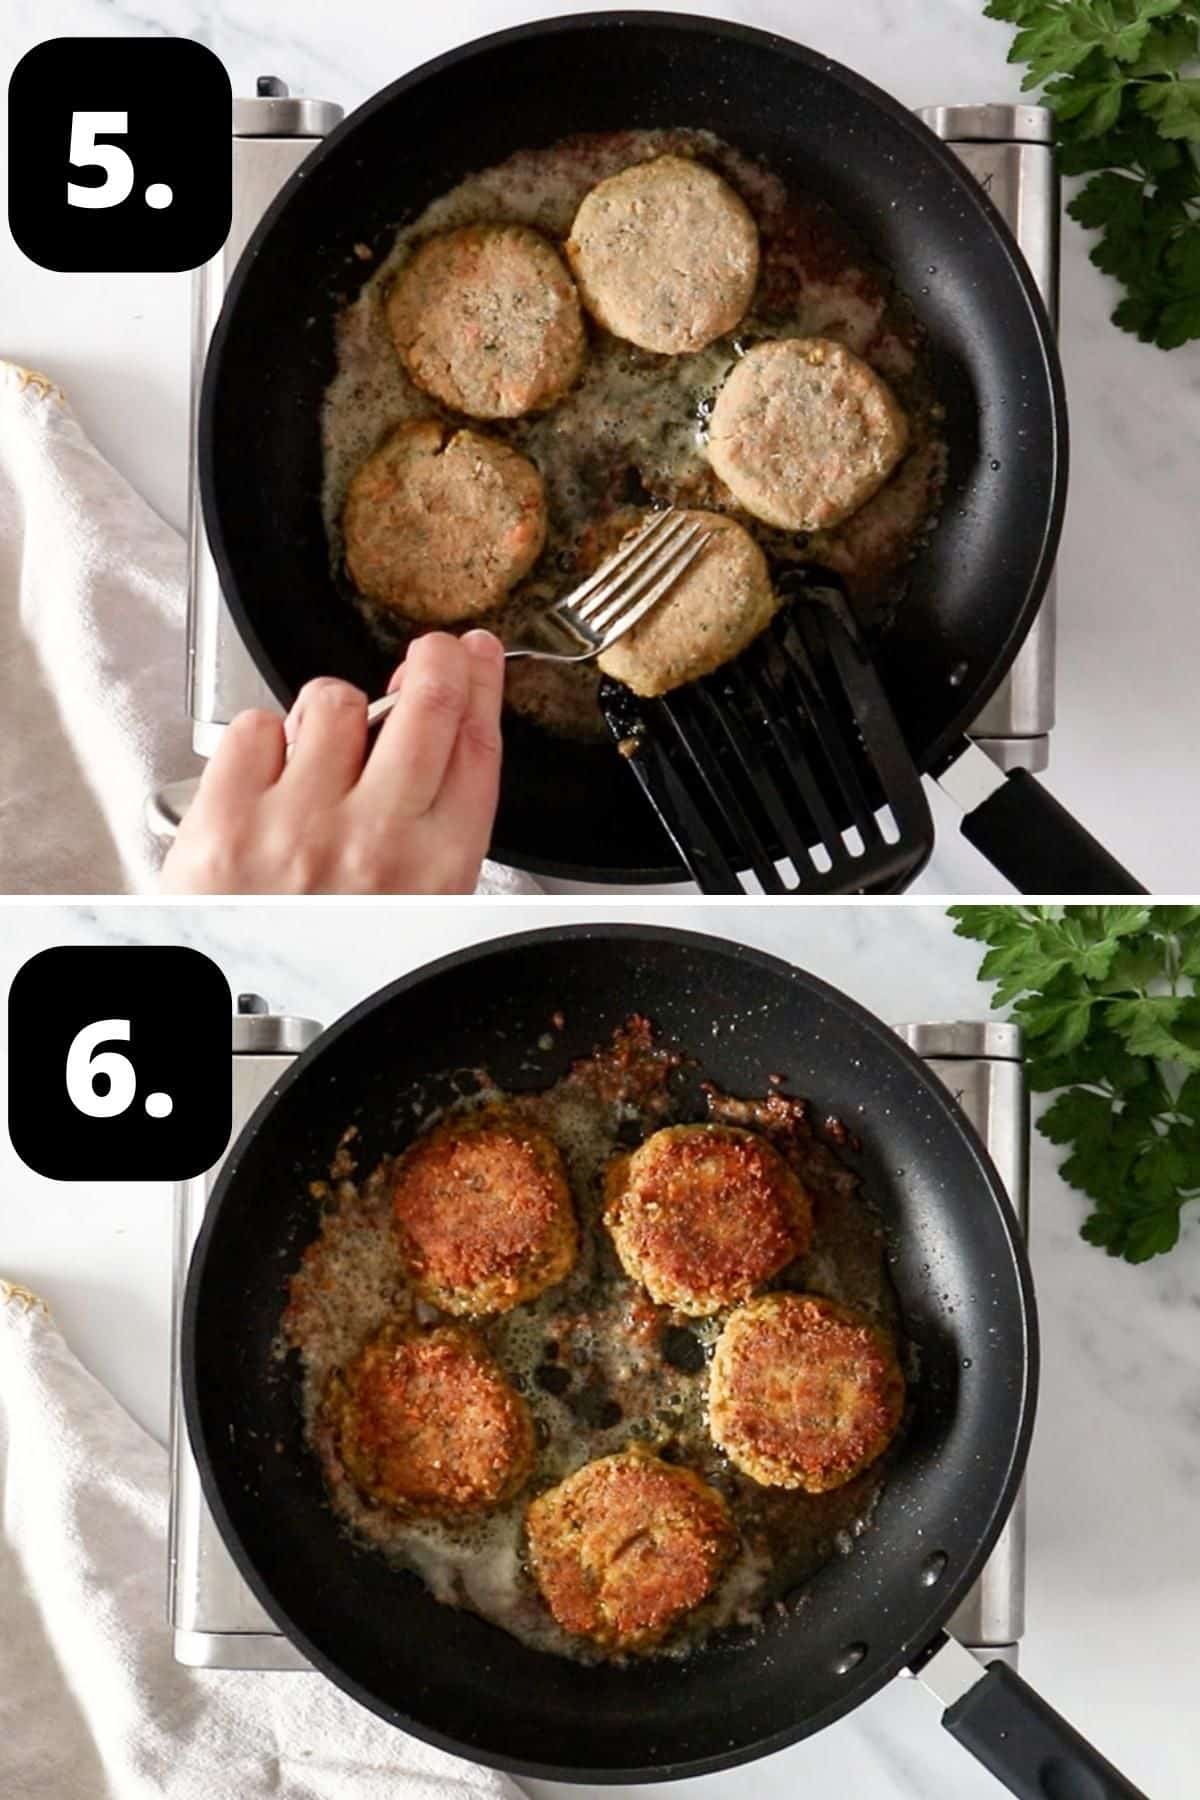 Steps 5-6 of preparing this recipe - frying the patties in oil and the cooked patties in the pan ready to serve.